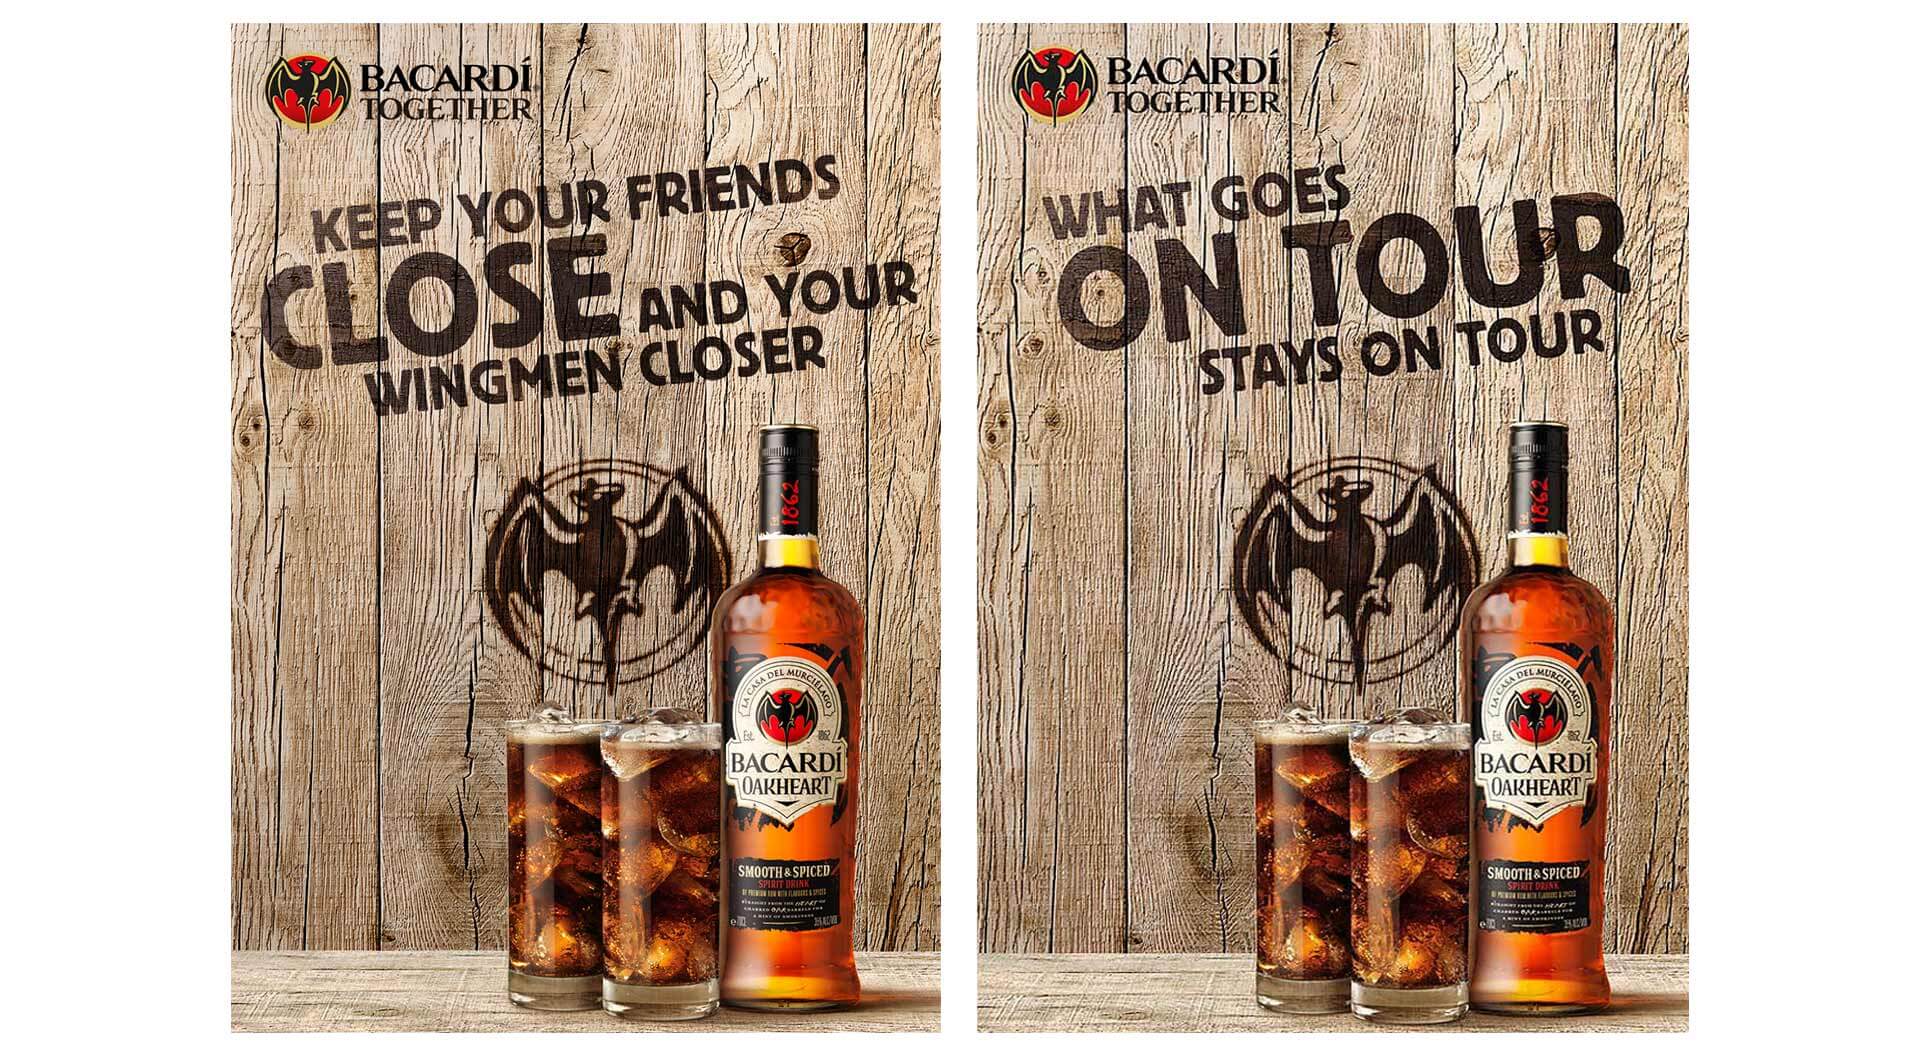 Bacardi Oakheart brand experience graphics, what goes on tour stays on tour brand platform